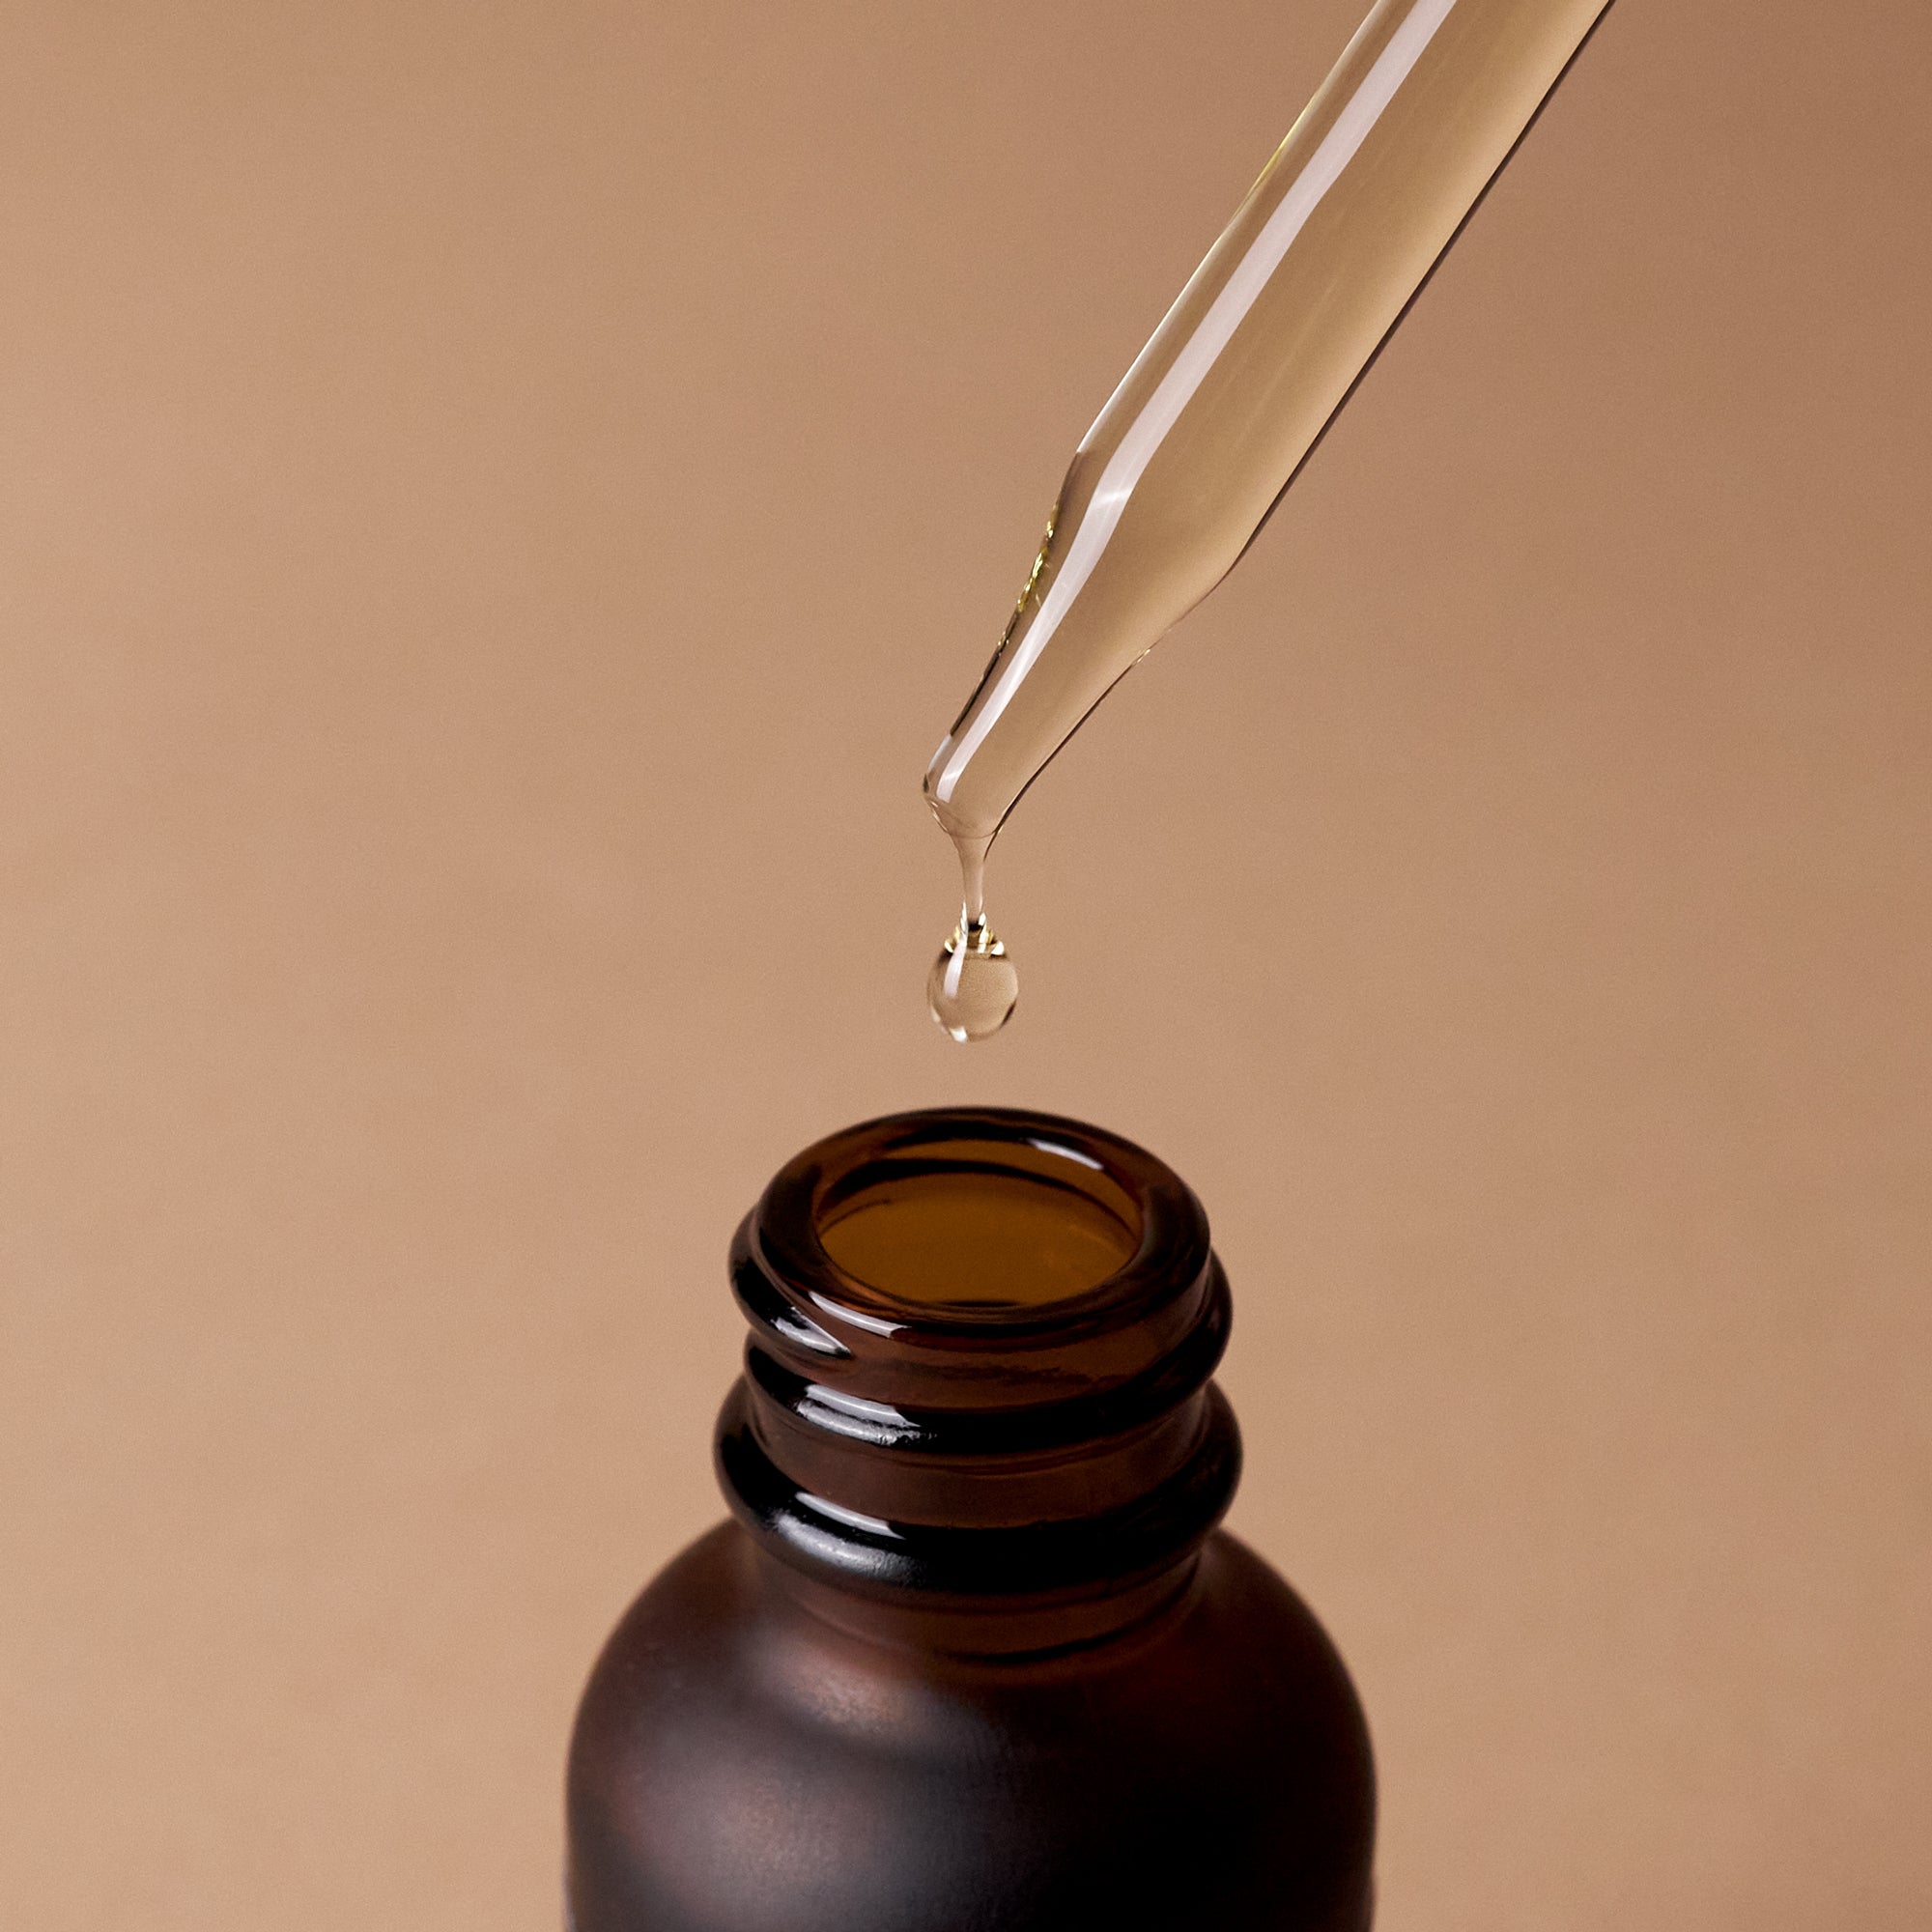 Caswell-Massey Heritage Face & Beard Oil: close-up shot of oil dripping out of dropper into amber bottle